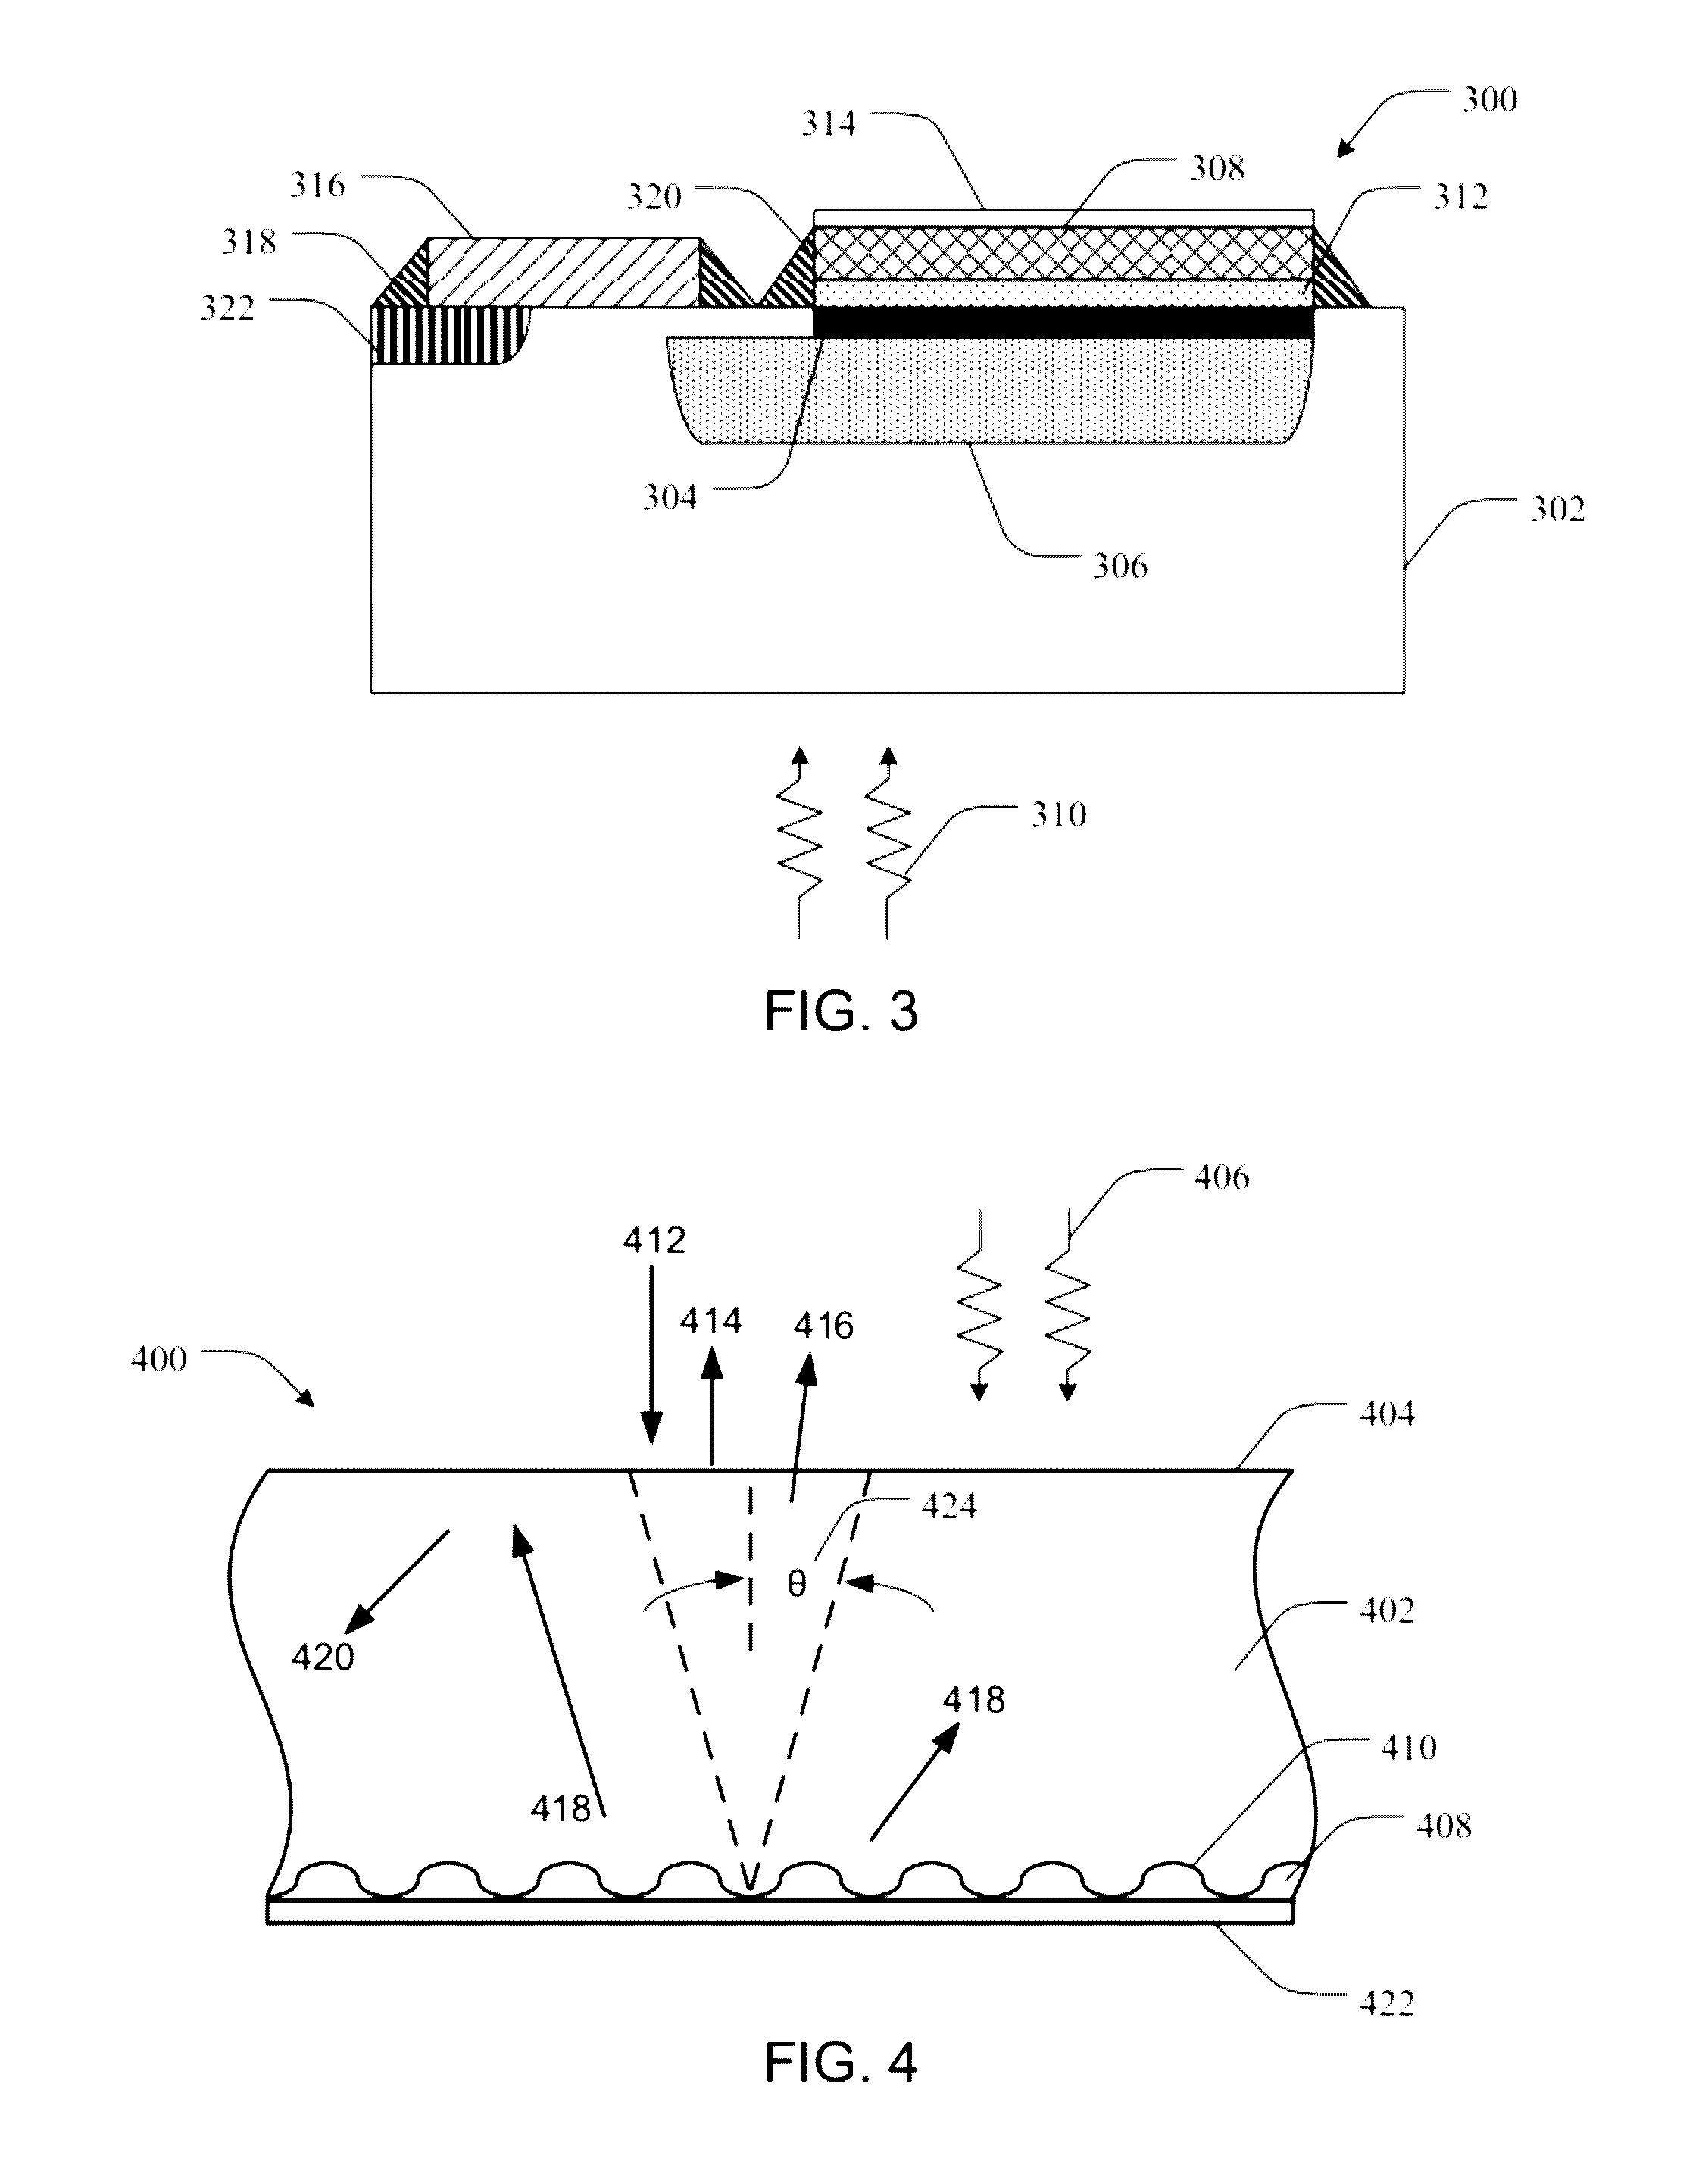 Process module for increasing the response of backside illuminated photosensitive imagers and associated methods